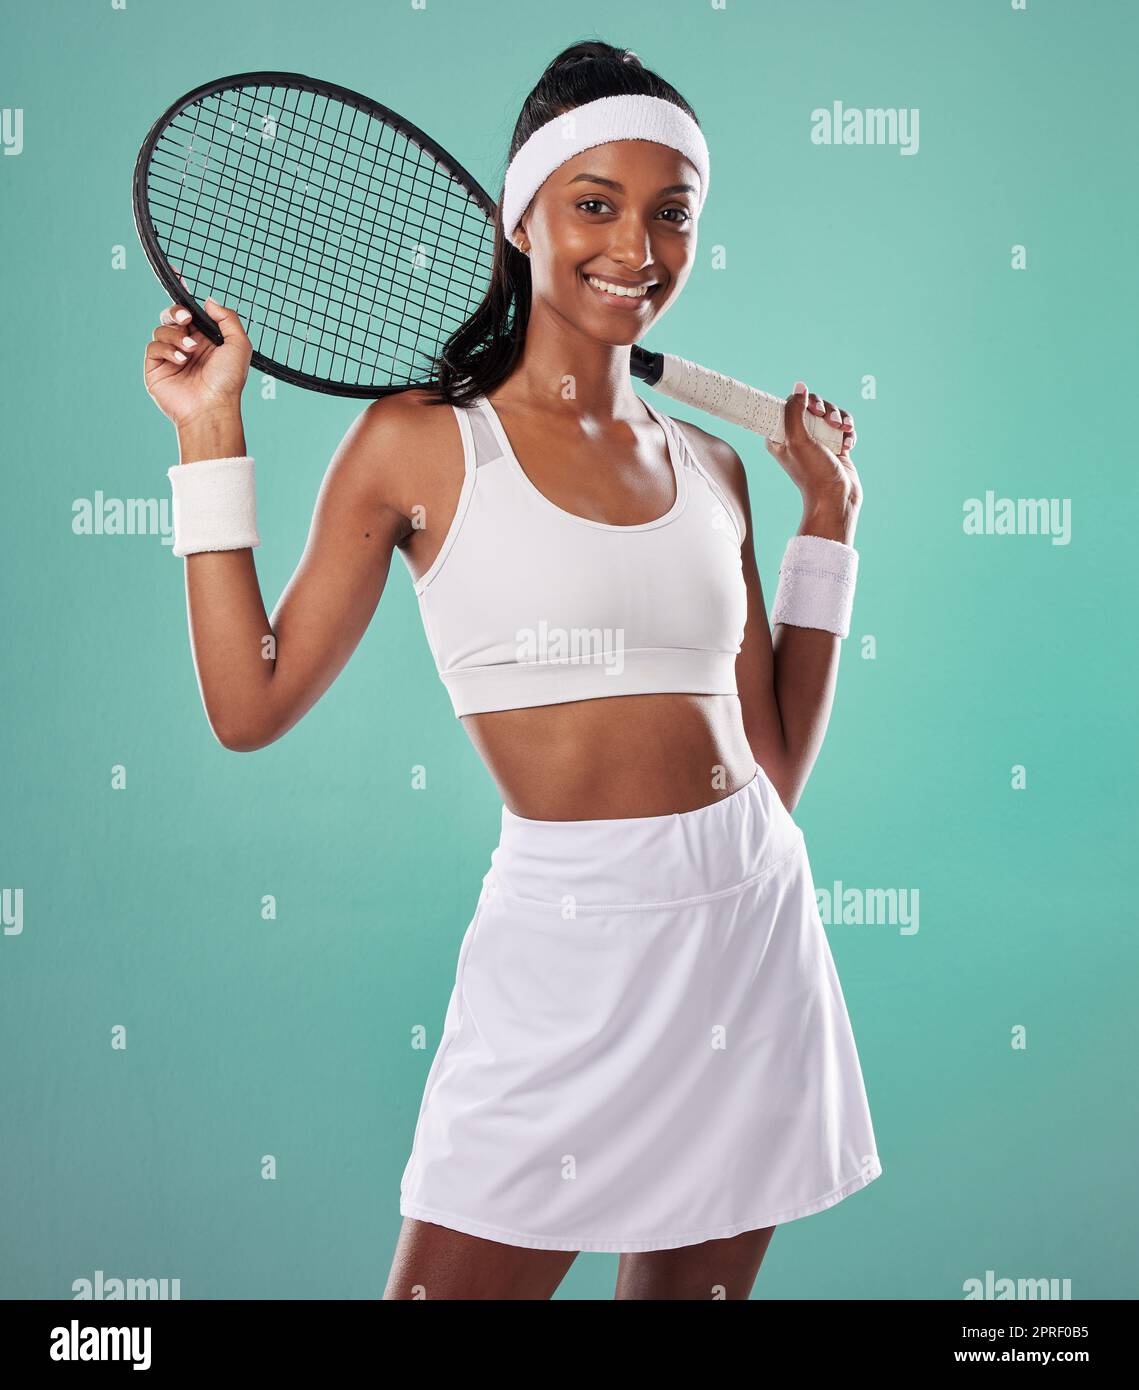 Female tennis player posing with racket, getting ready for competitive match and looking sporty while standing against blue studio background. Active, fit and happy professional sports person Stock Photo